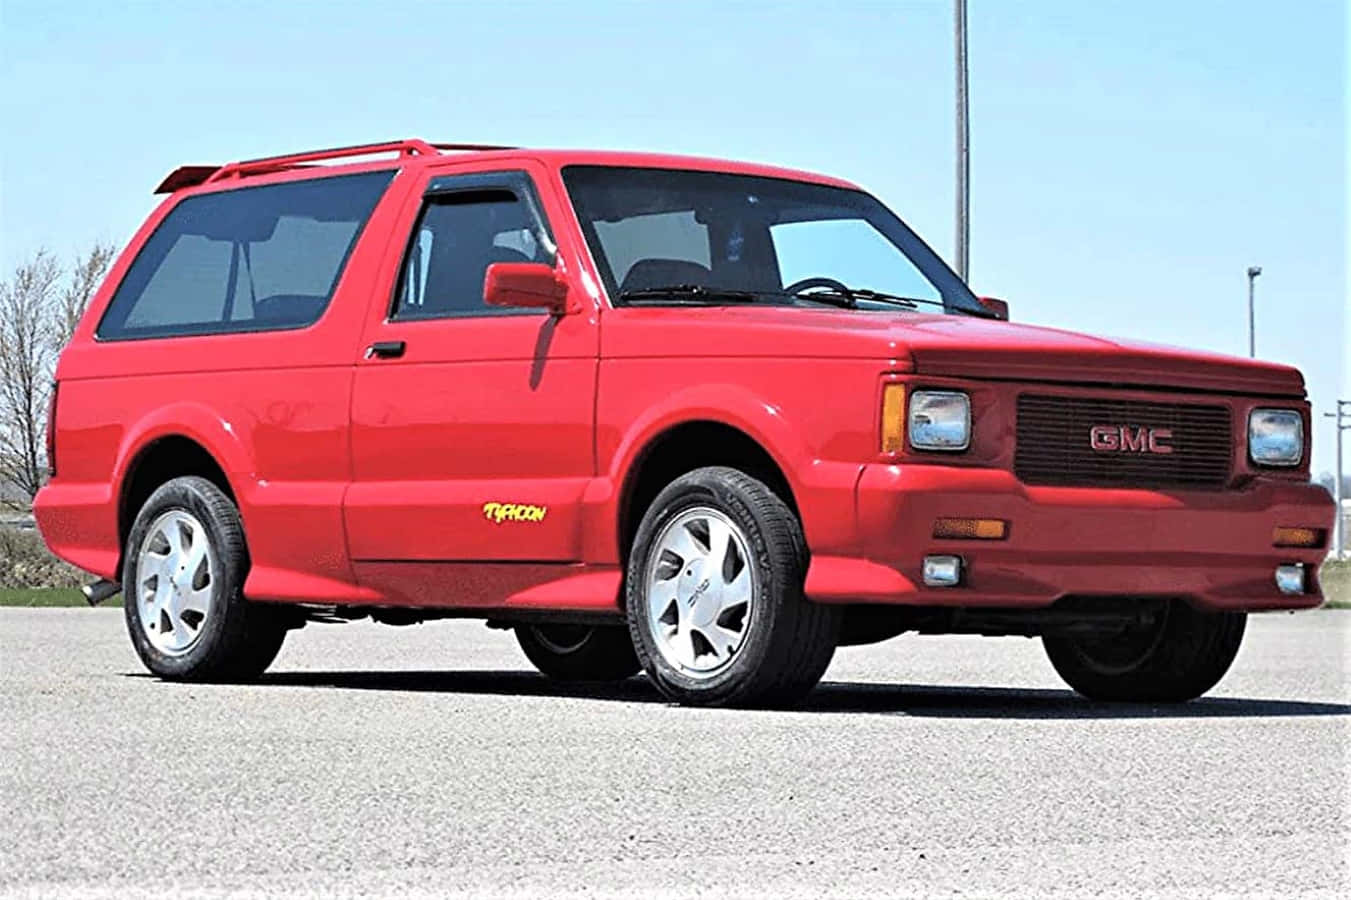 Immaculate GMC Typhoon showcasing its timeless design and powerful features Wallpaper